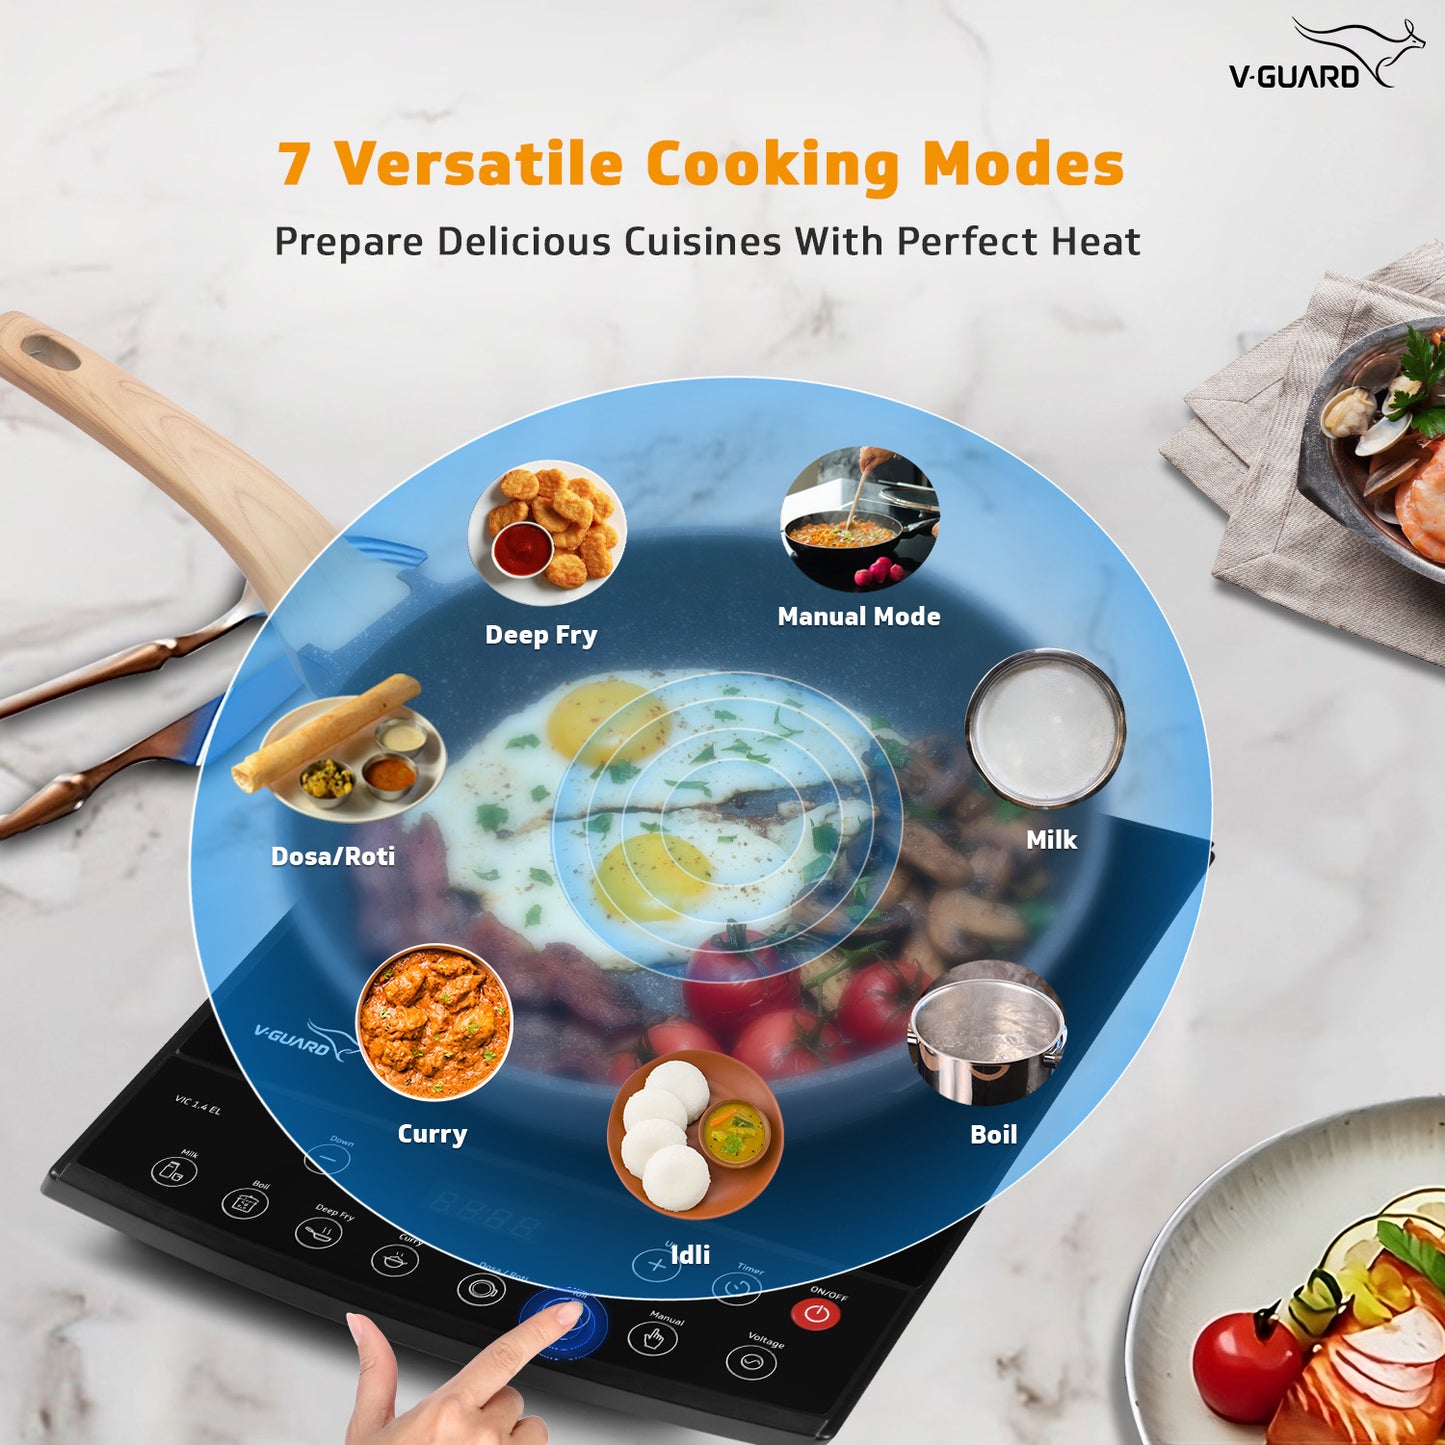 VIC 1.4 EL Induction Cooktop / 1400 Watt Electric Induction cooker with 7 Power Levels|Temperature Control | Push button| Auto-cutoff | Elegant Crystal Glass Matte Finish